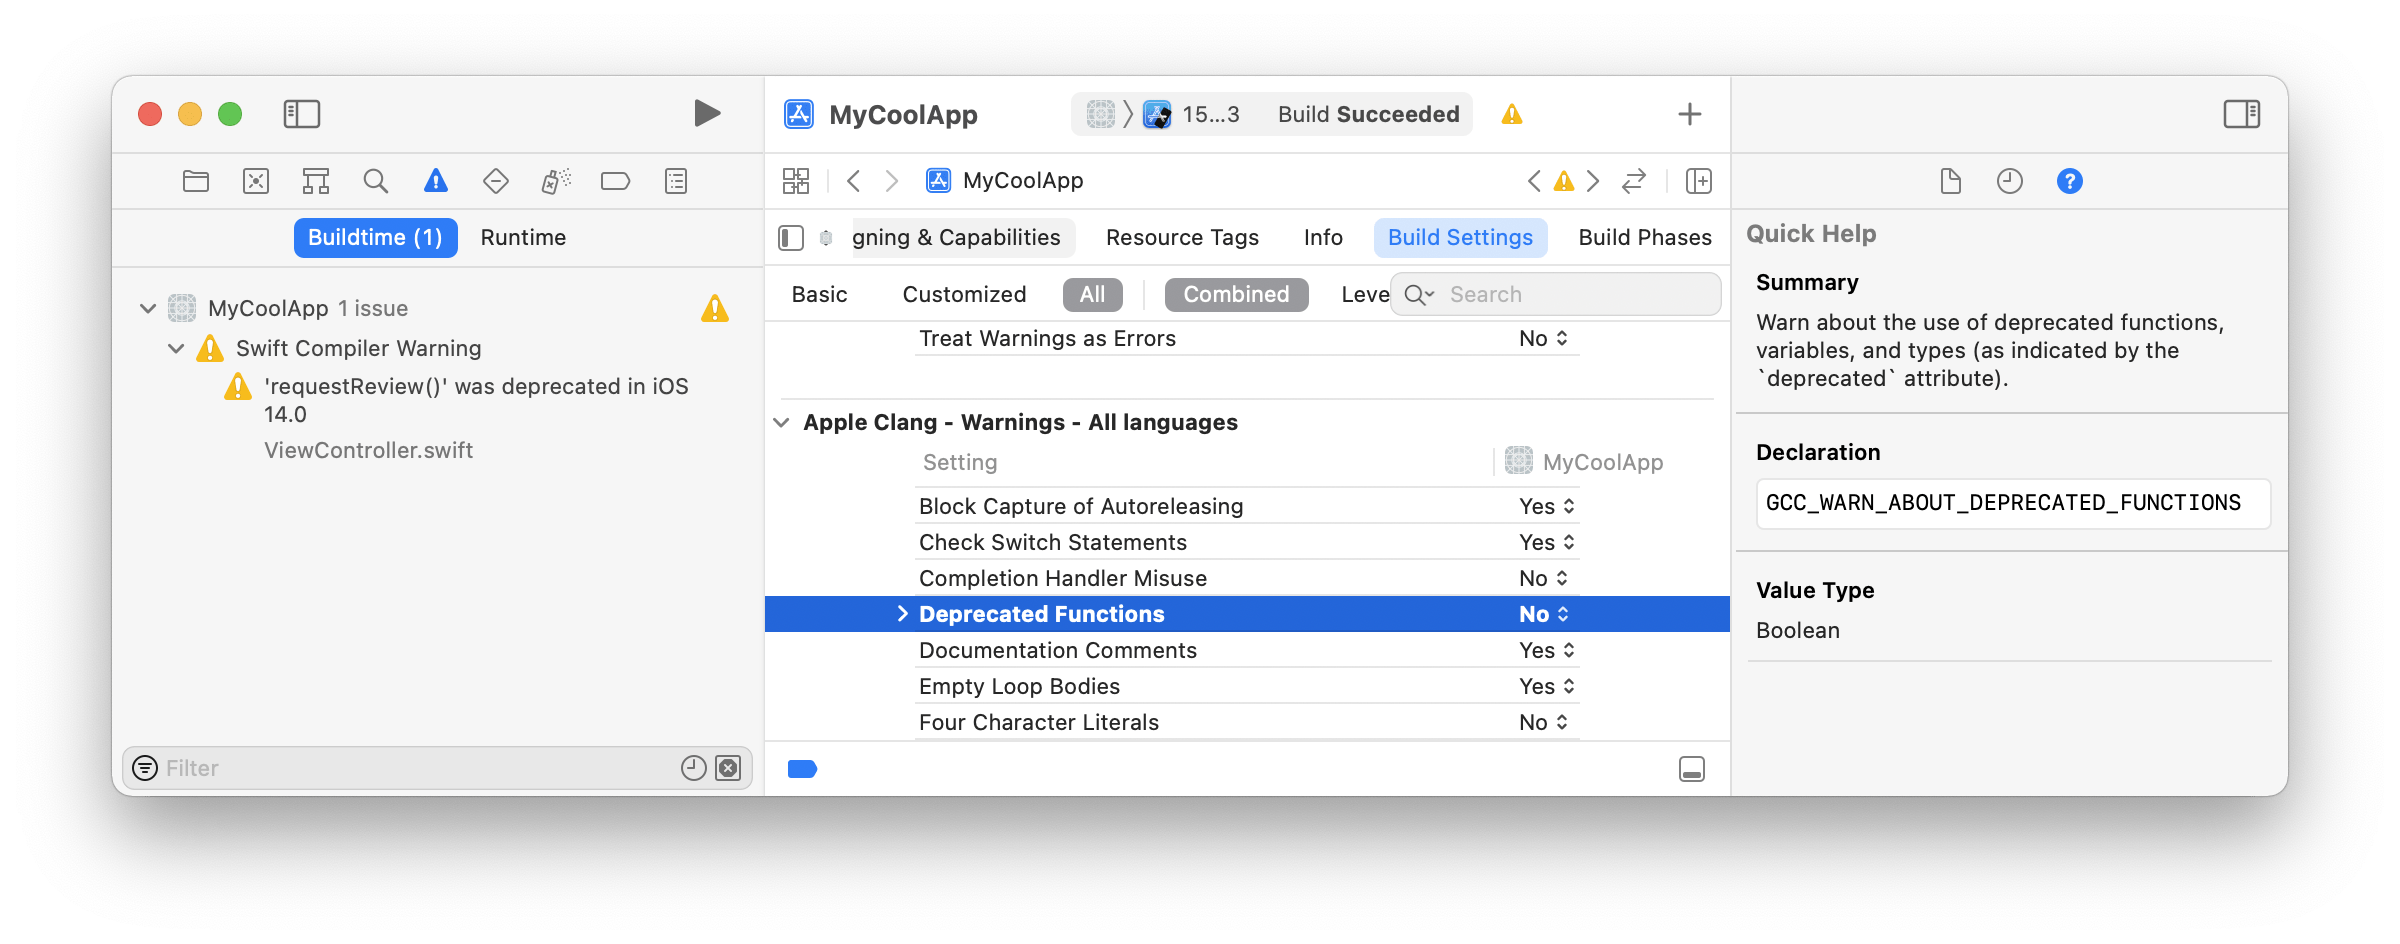 Screenshot of Xcode project showing the Deprecated Functions build setting selected and set to No but there is still a warning. Summary: Warn about the use of deprecated functions, variables, and types (as indicated by the deprecated attribute).